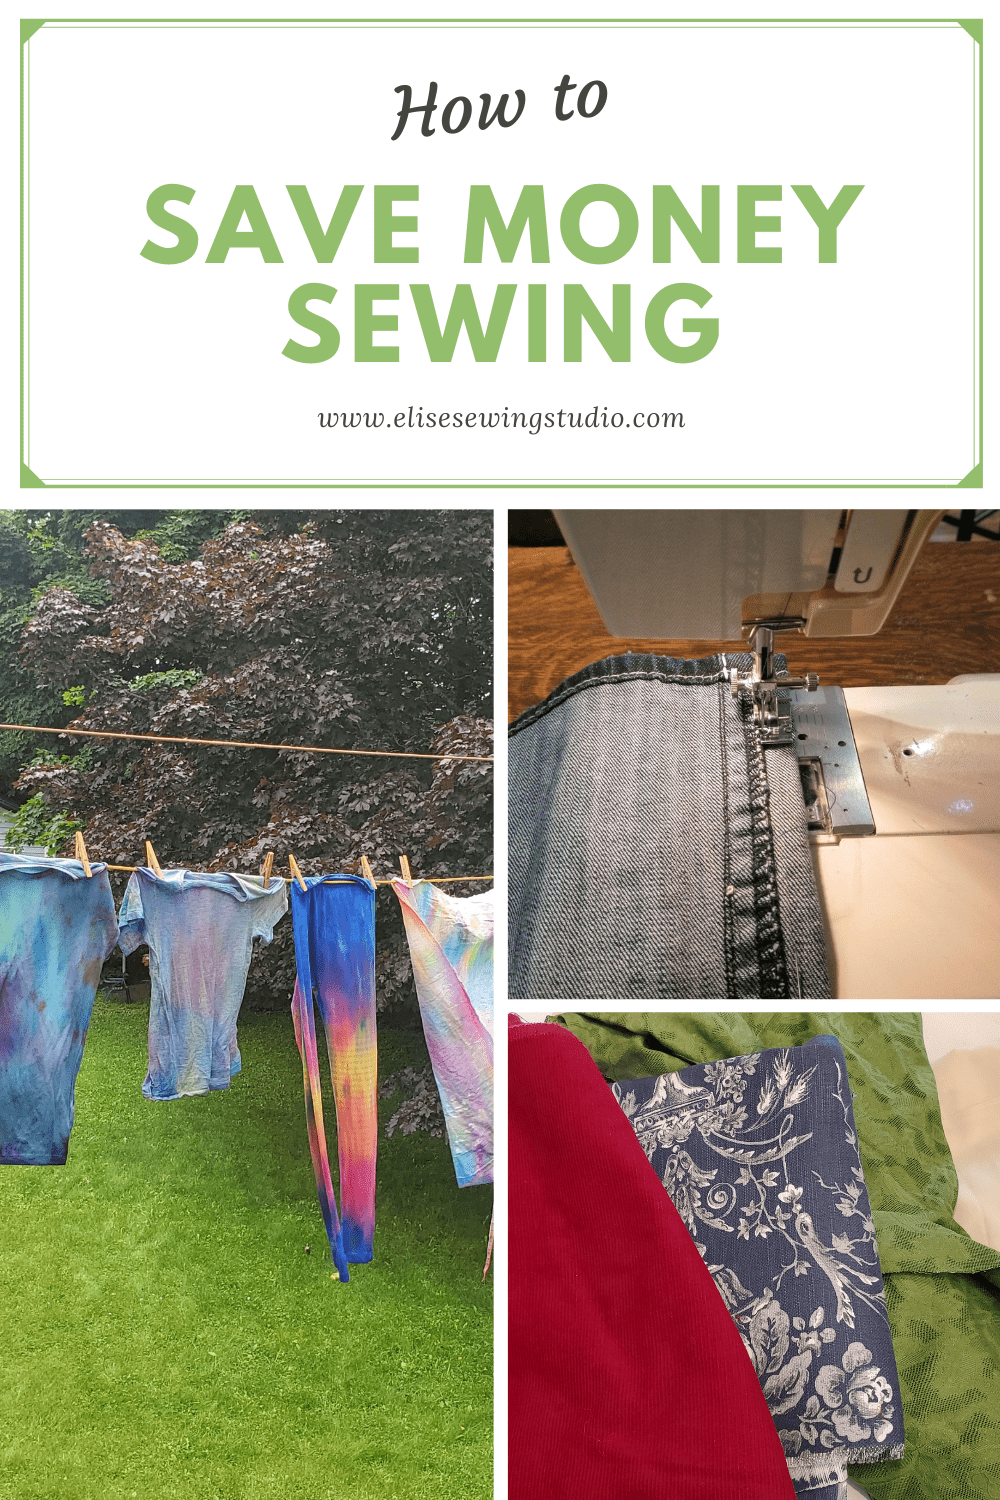 How to Save Money Sewing